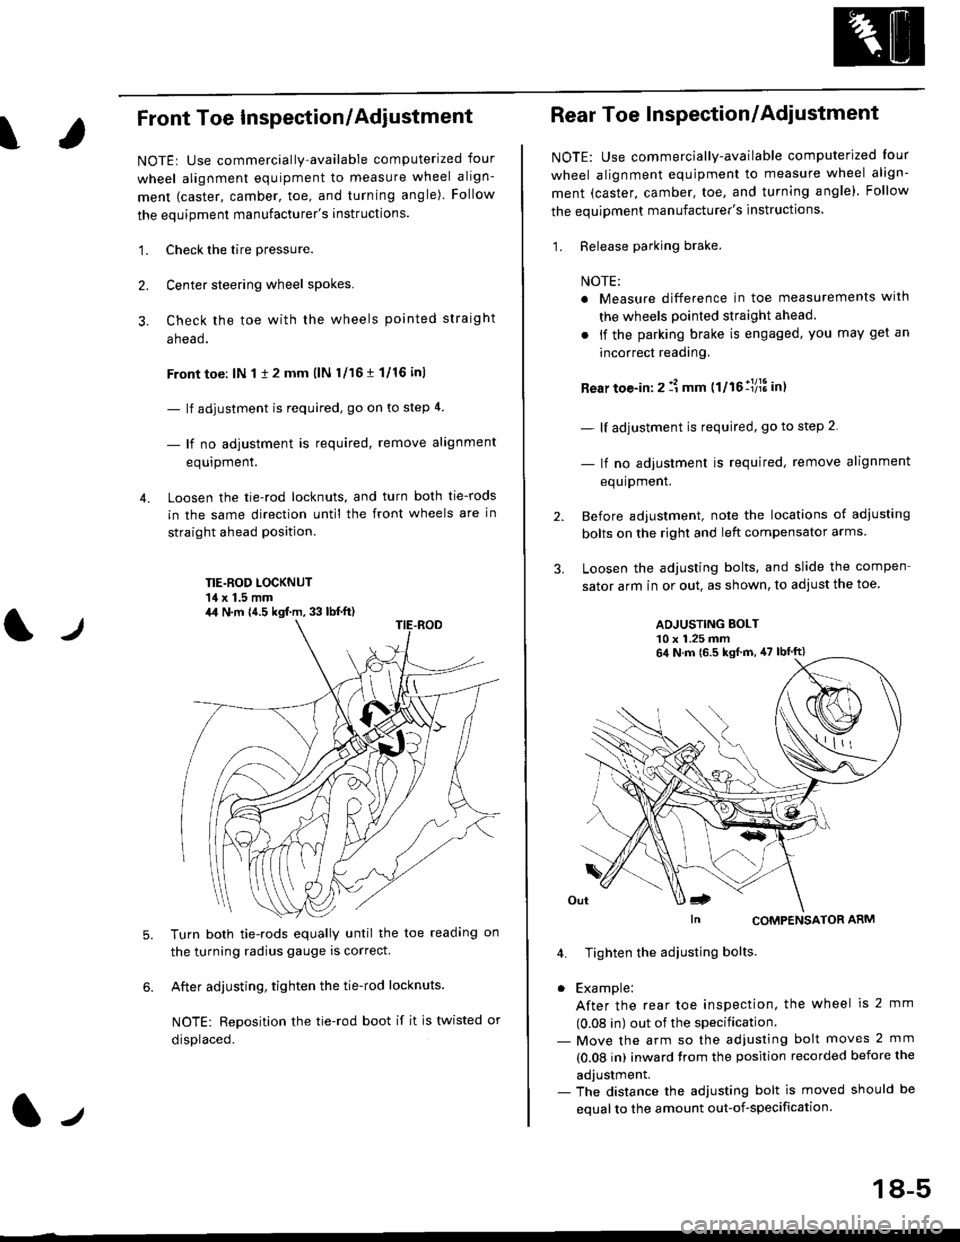 HONDA CIVIC 1999 6.G Workshop Manual ?
Front Toe Inspection/Adiustment
NOTE: Use commercially-available computerized four
wheel alignment equipment to measure wheel align-
ment (caster, camber, toe, and turning angle). Follow
the equipme